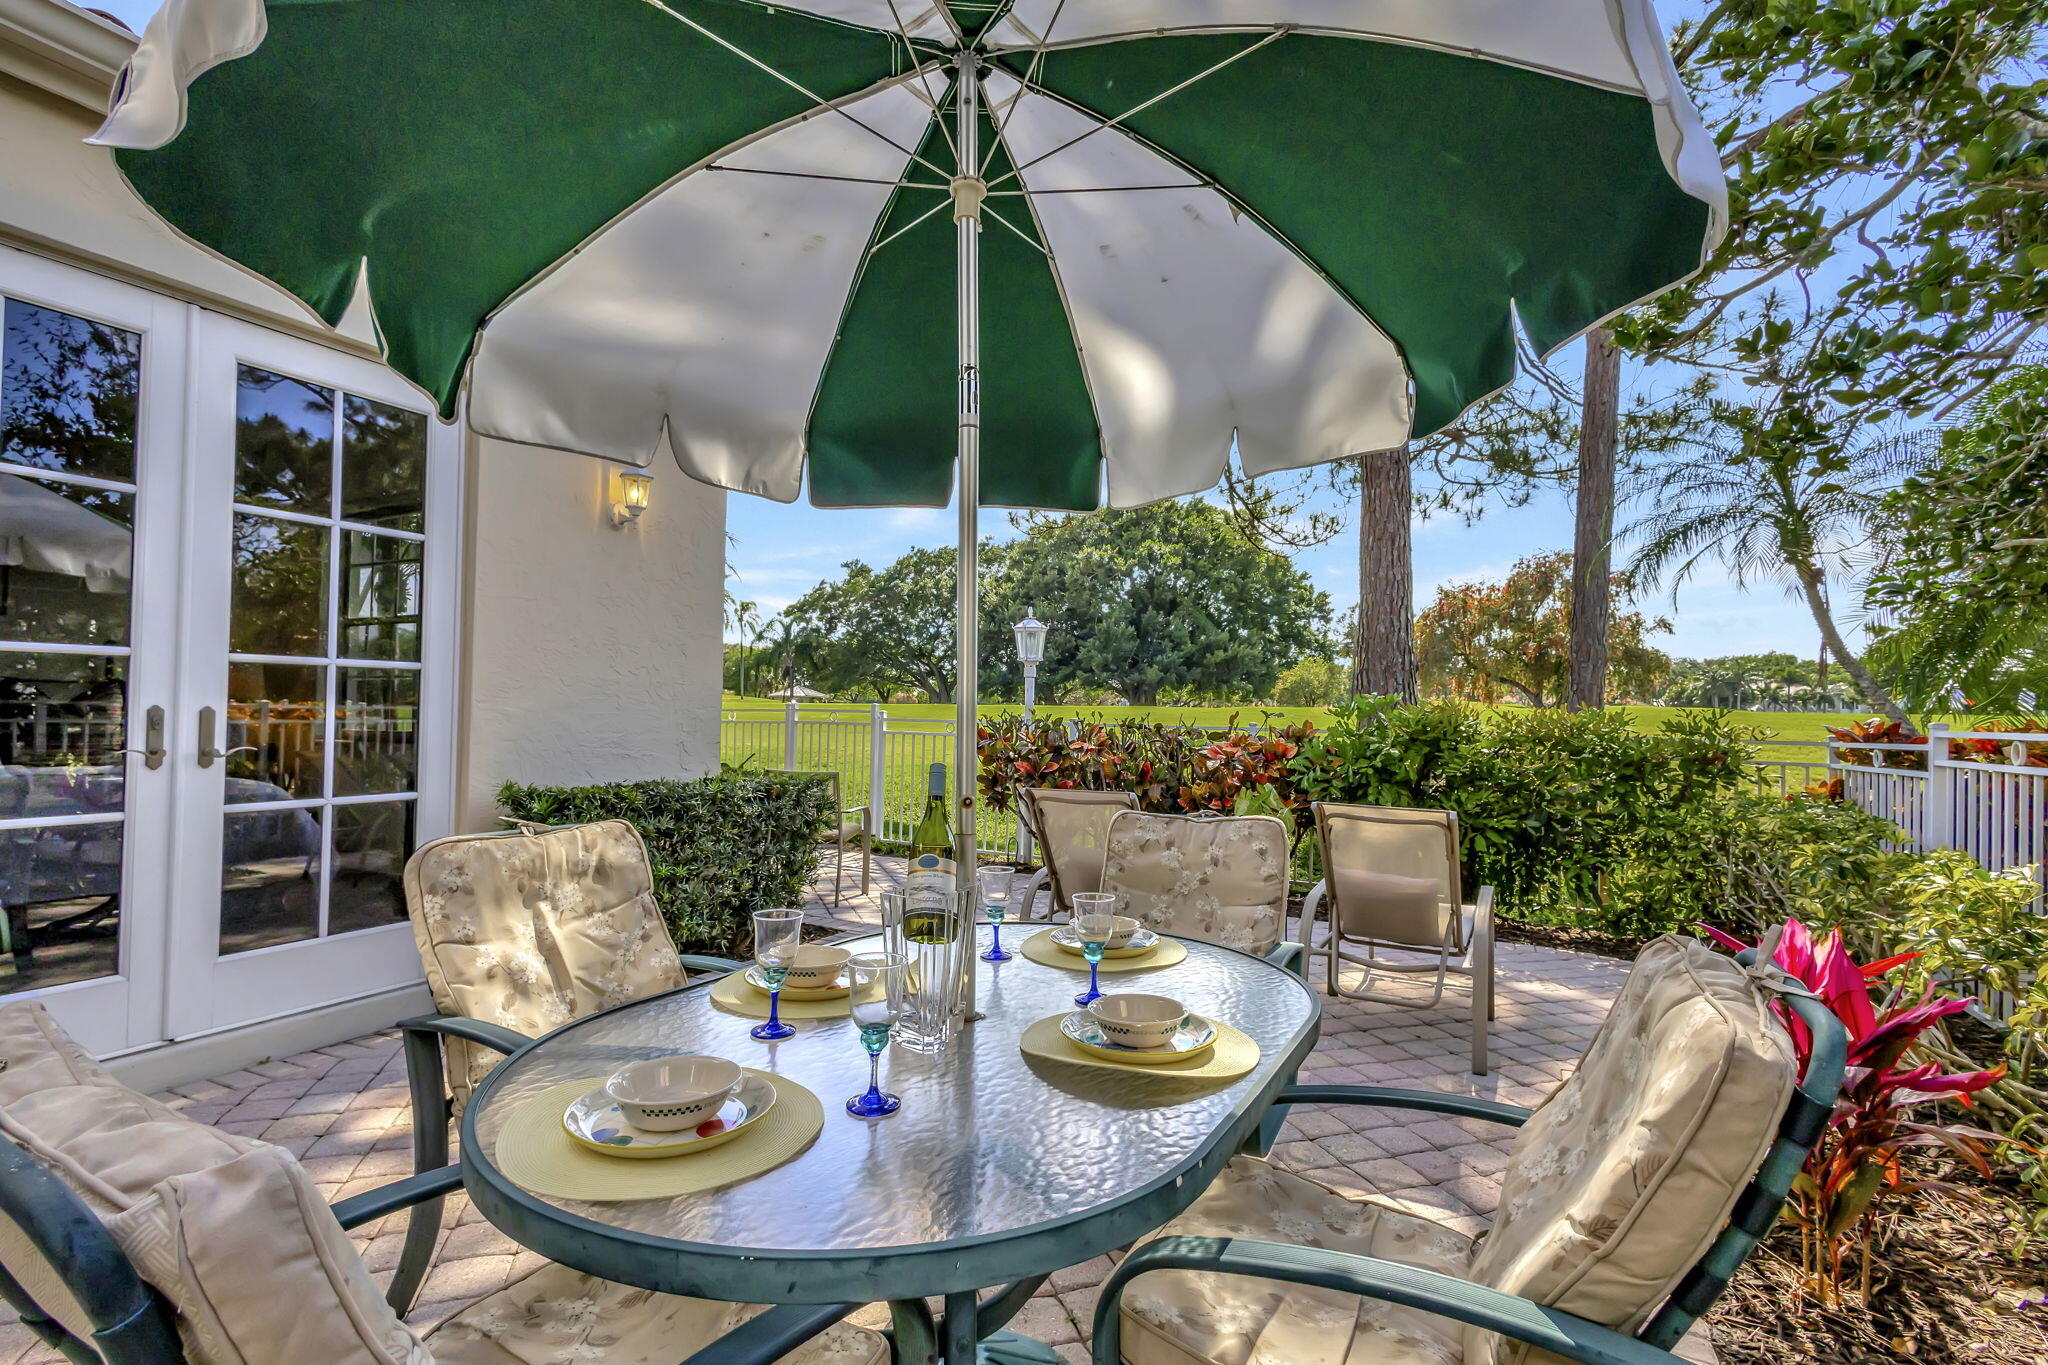 a view of a patio with a dining table and chairs under an umbrella